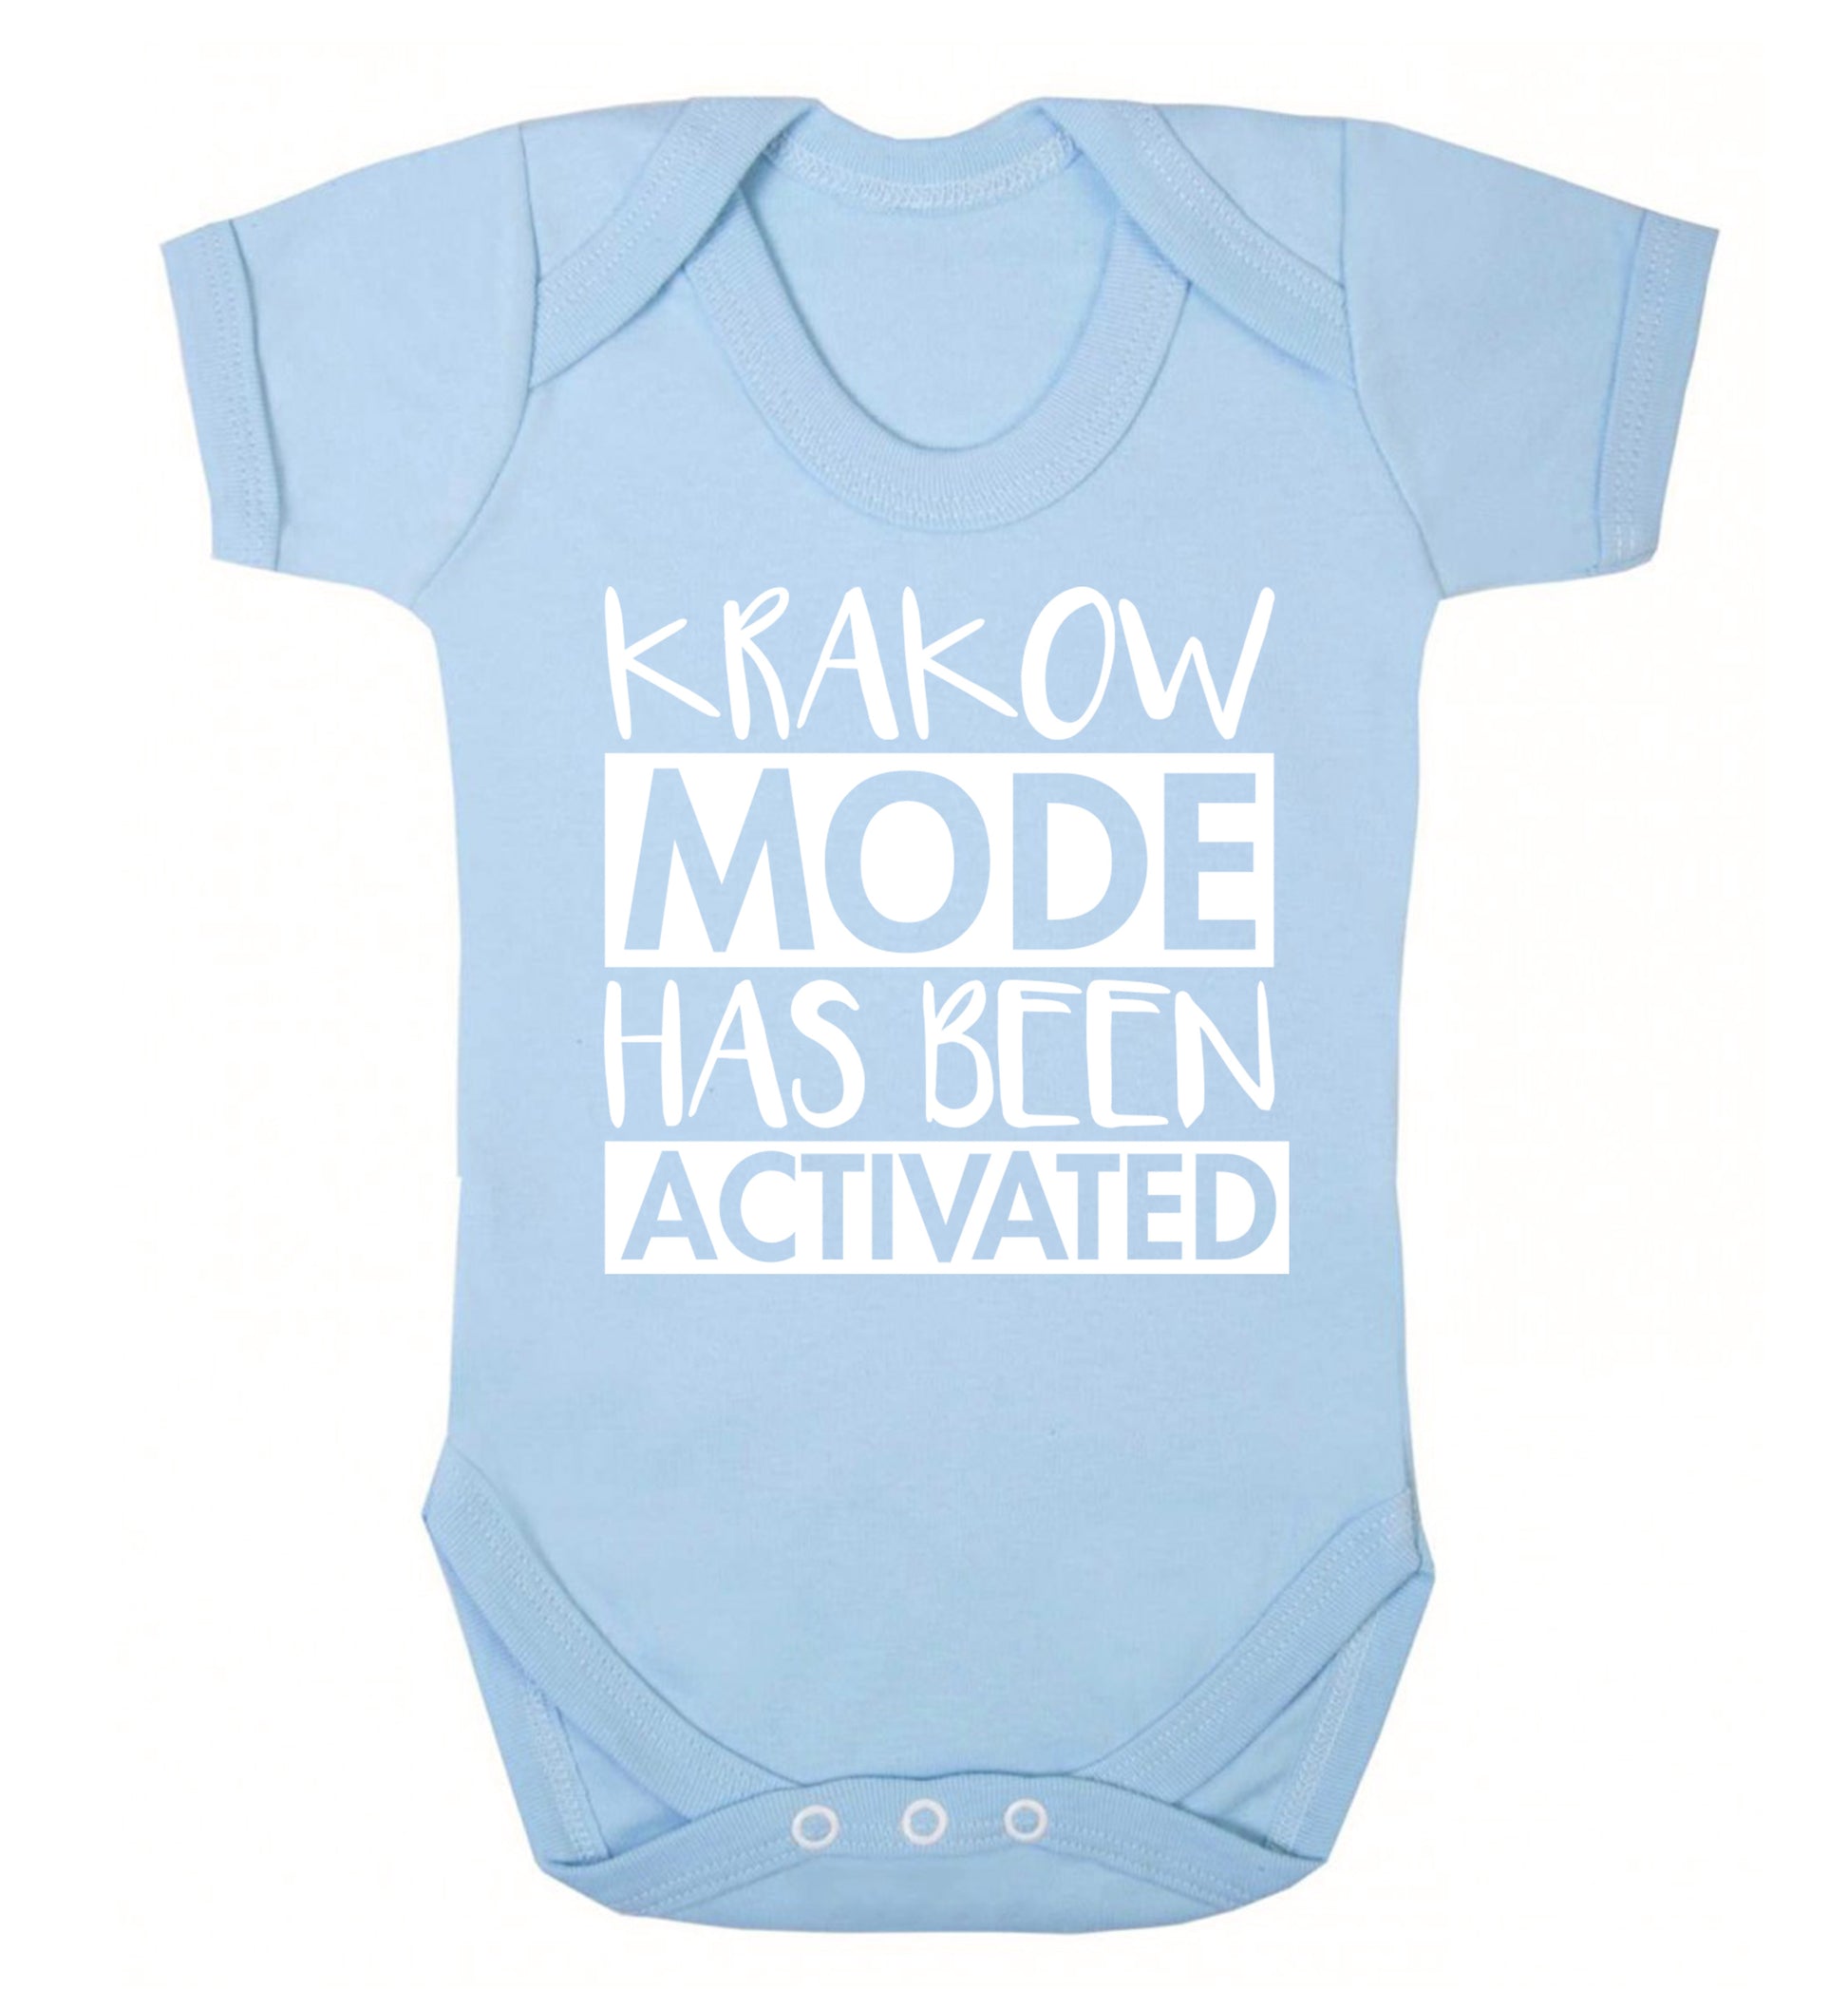 Krakow mode has been activated Baby Vest pale blue 18-24 months